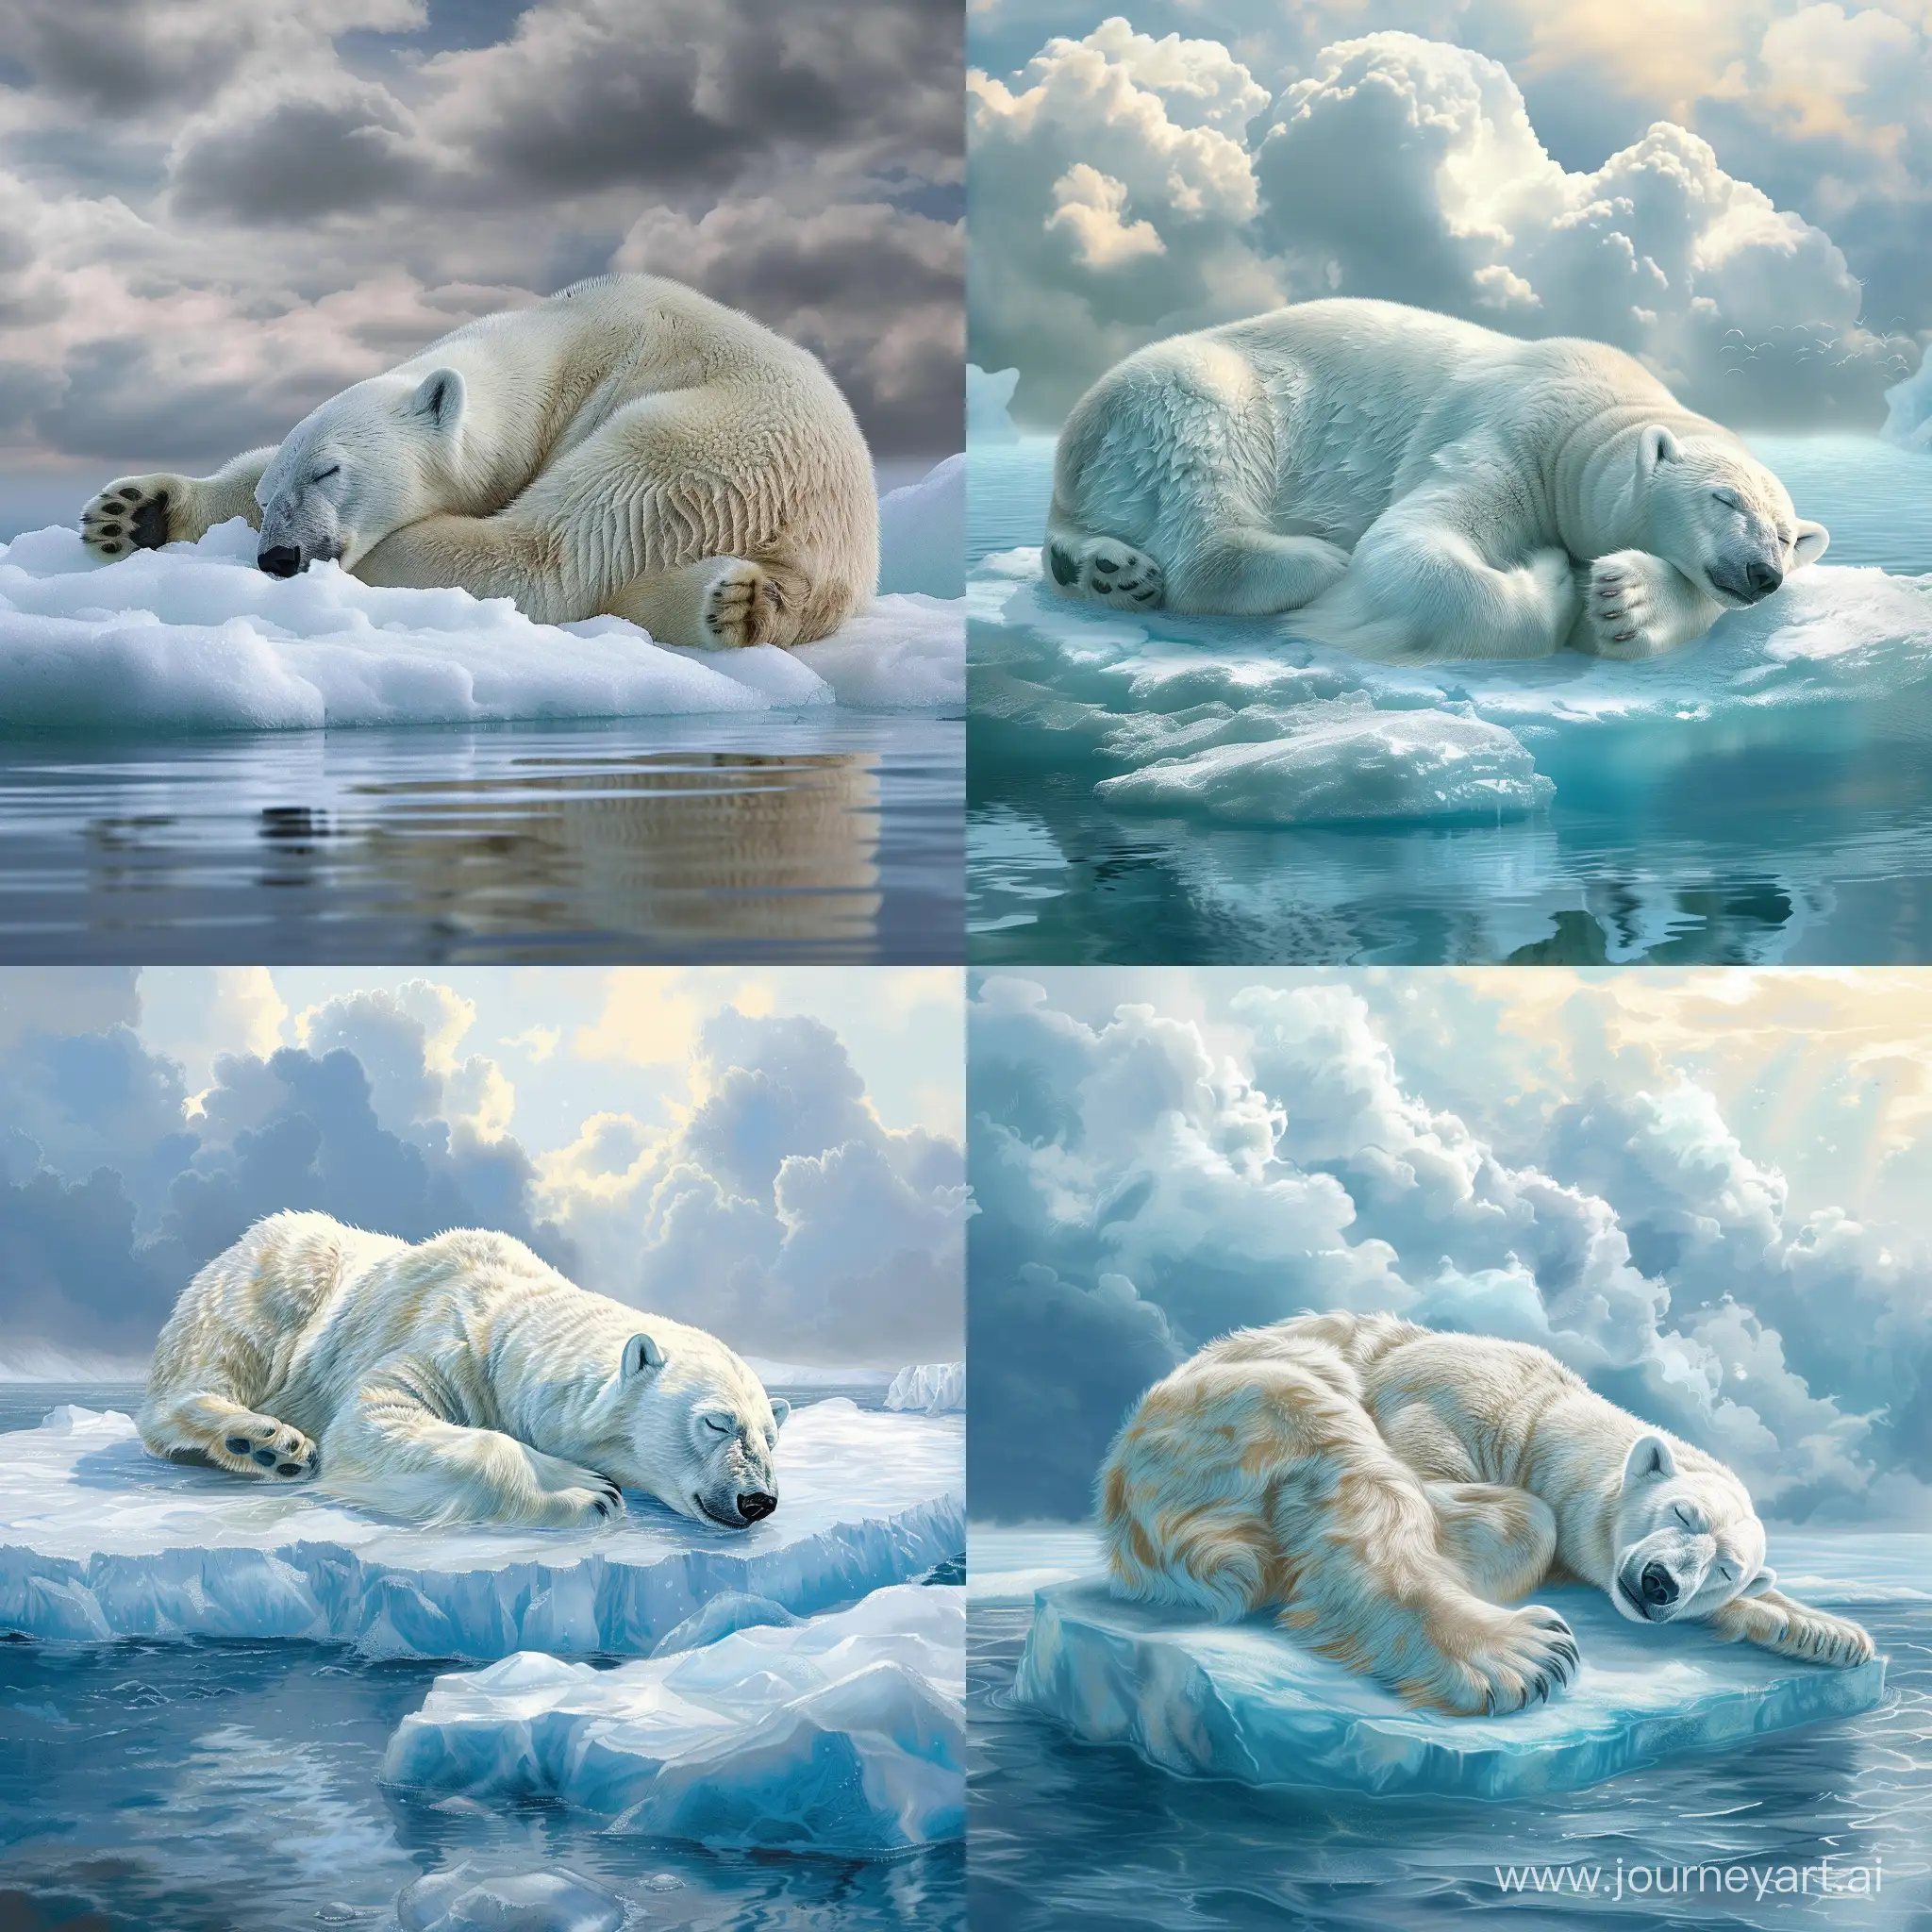  A polar bear is sleeping on an ice floe in the Arctic Ocean. The bear is surrounded by water and ice, and the sky is cloudy. The bear is white and the ice is blue, and the water is a deep blue. The bear is in a peaceful and relaxed state.